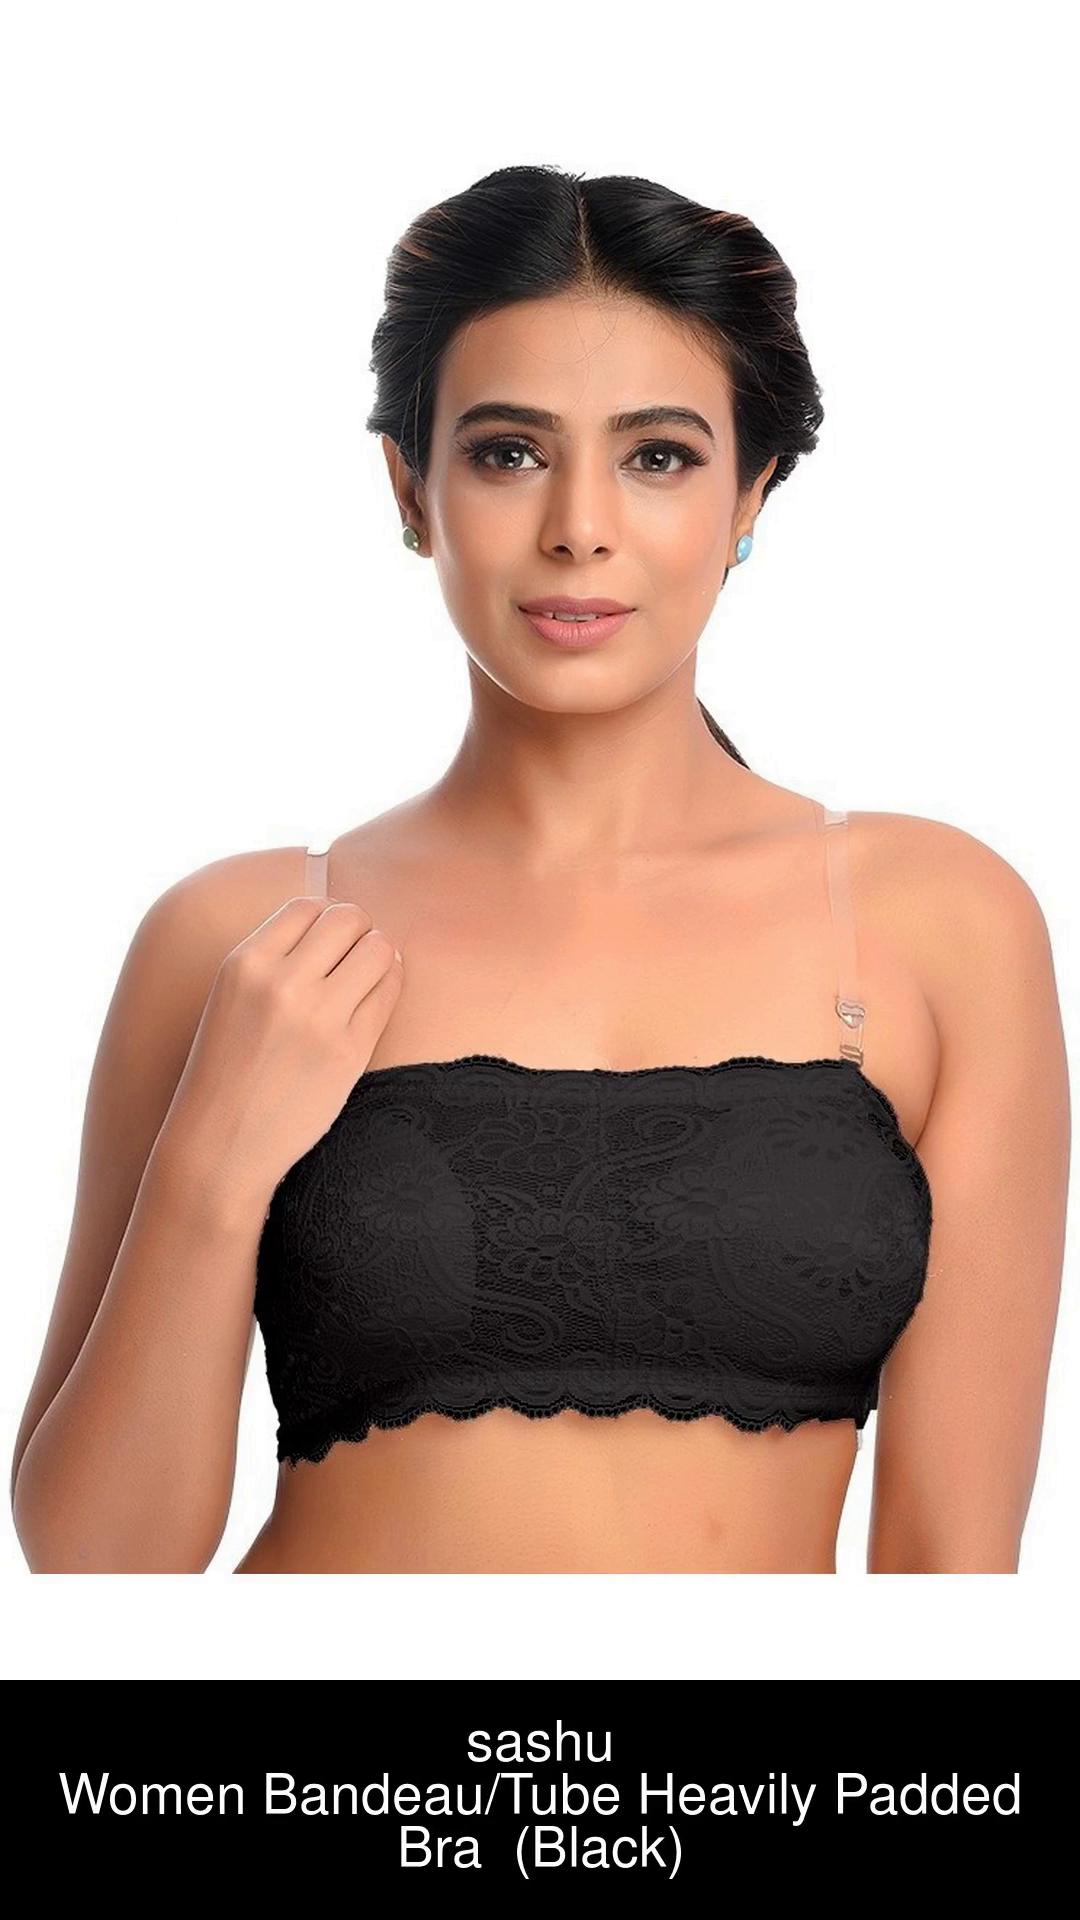 sashu lace tube padded Hook bra with free Transparent Straps and Soft Removable  pads. Women Bandeau/Tube Heavily Padded Bra - Buy sashu lace tube padded  Hook bra with free Transparent Straps and